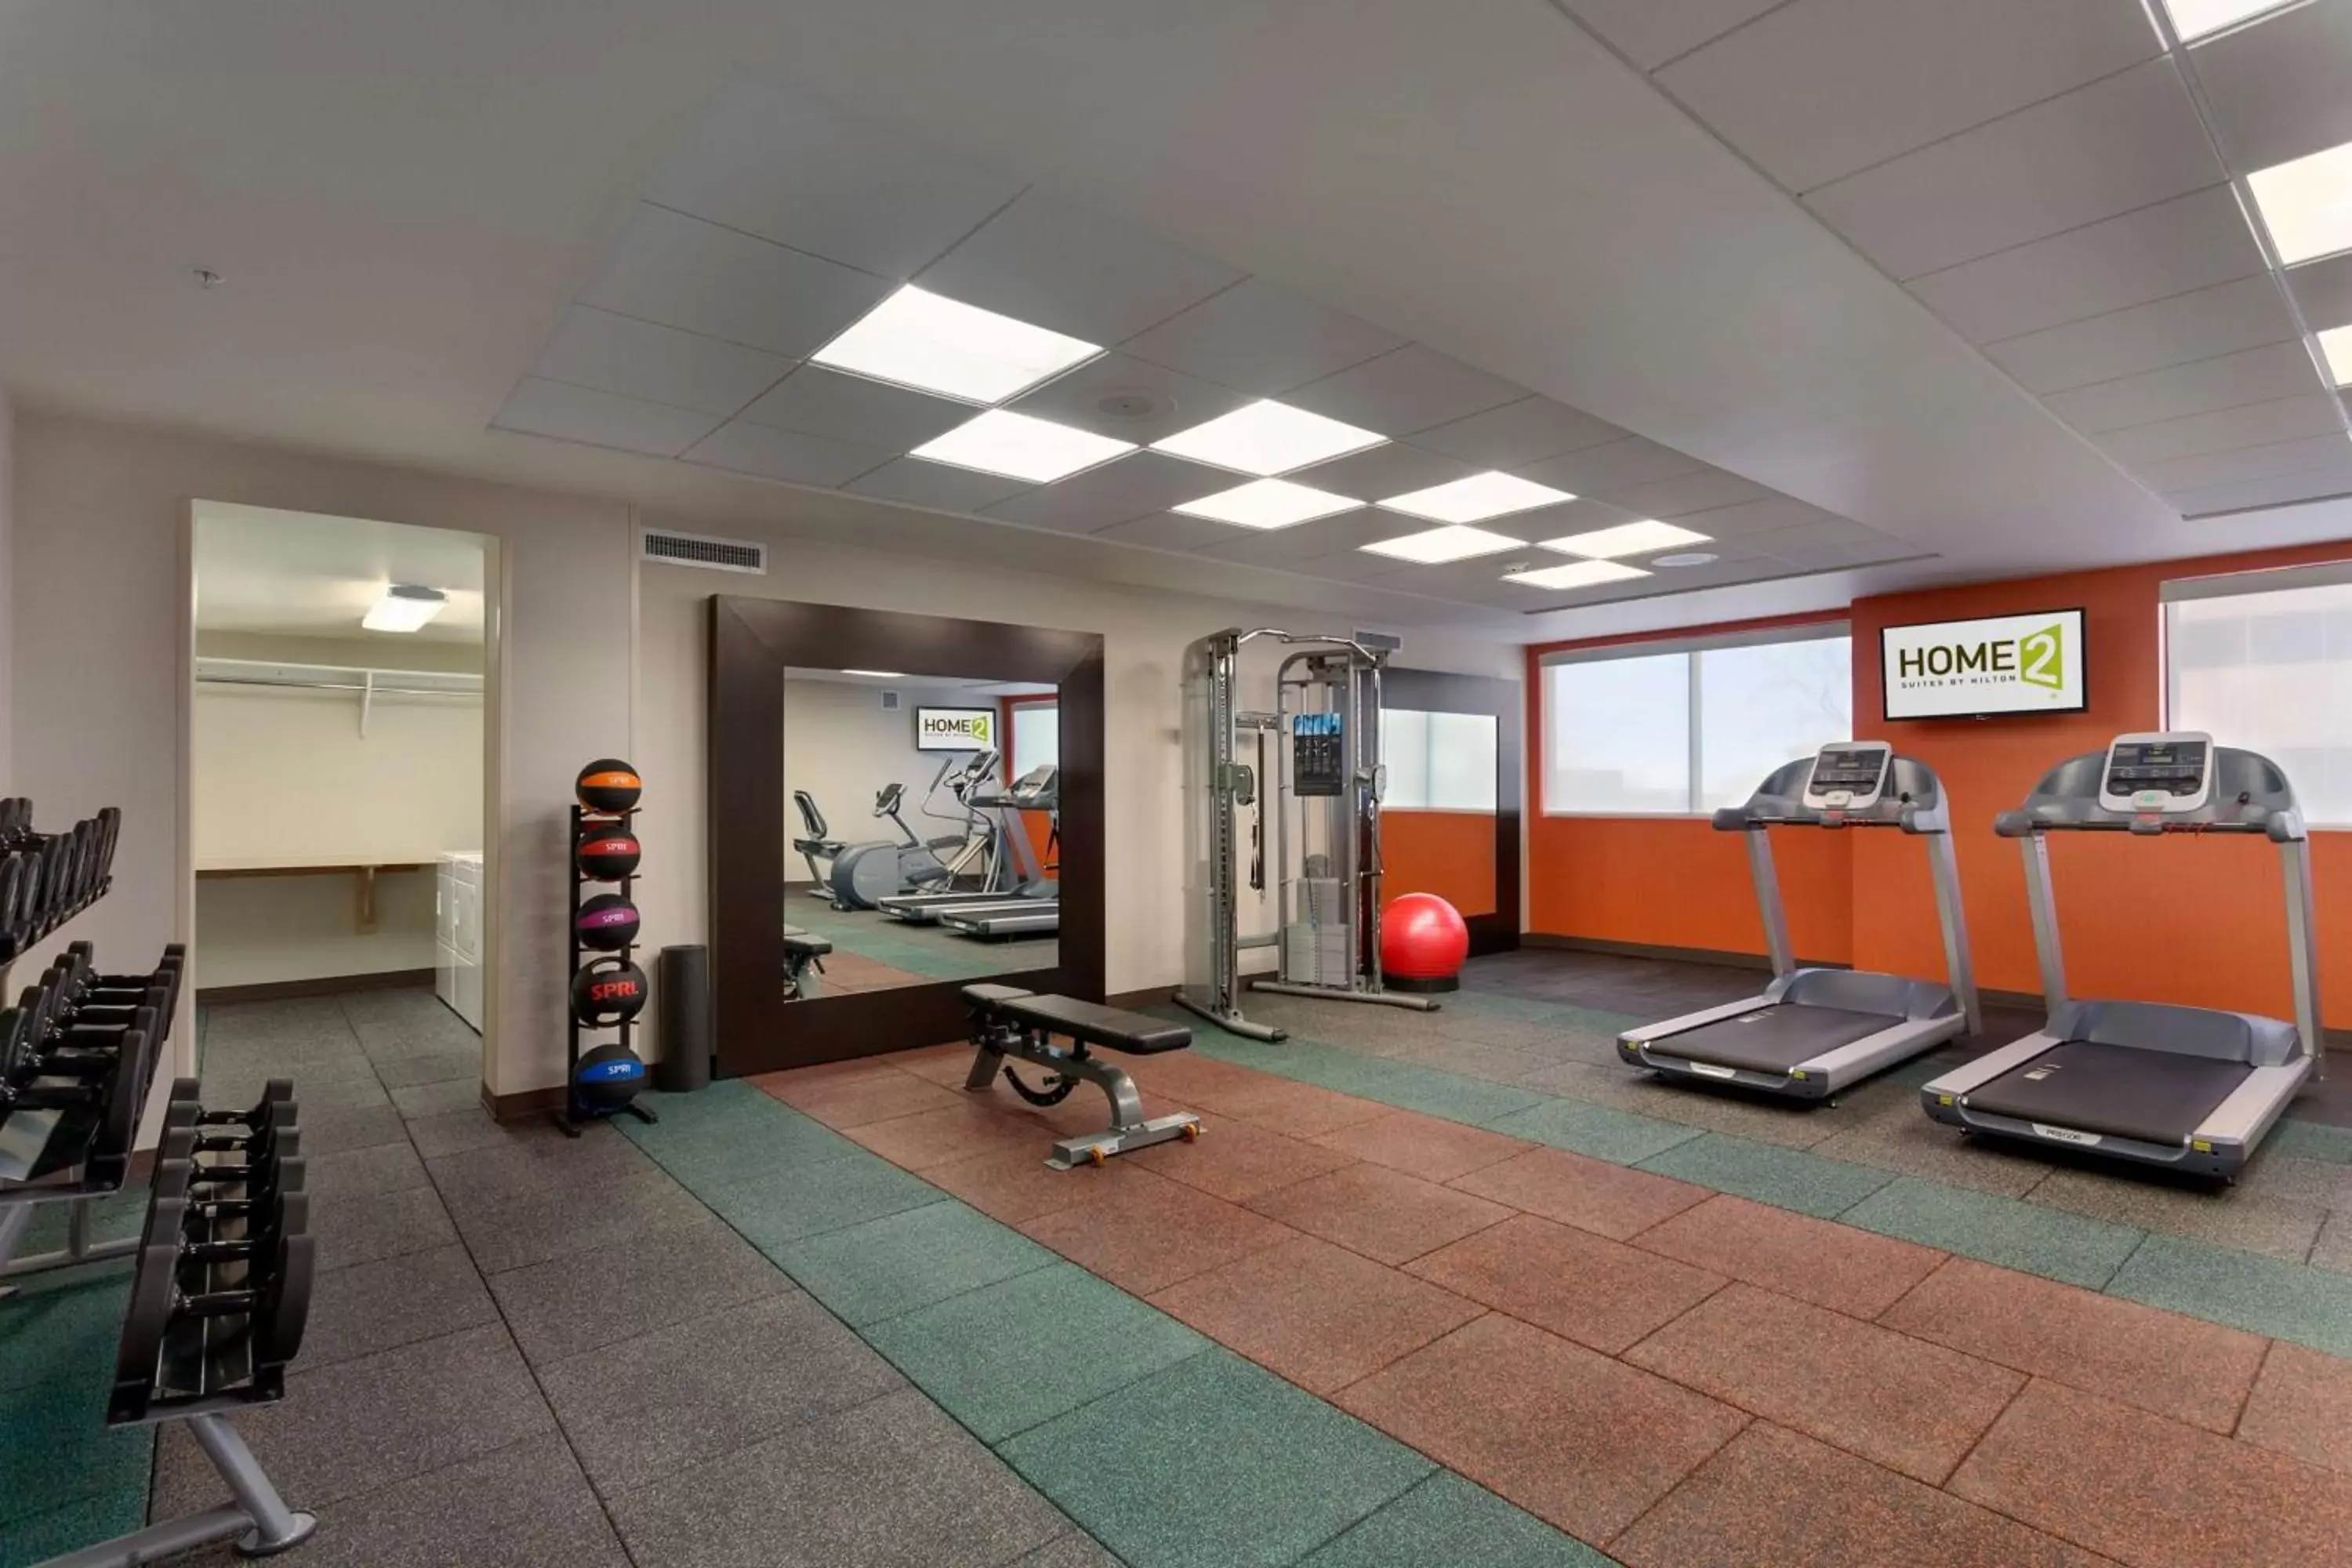 Fitness centre/facilities, Fitness Center/Facilities in Home2 Suites by Hilton Denver West / Federal Center